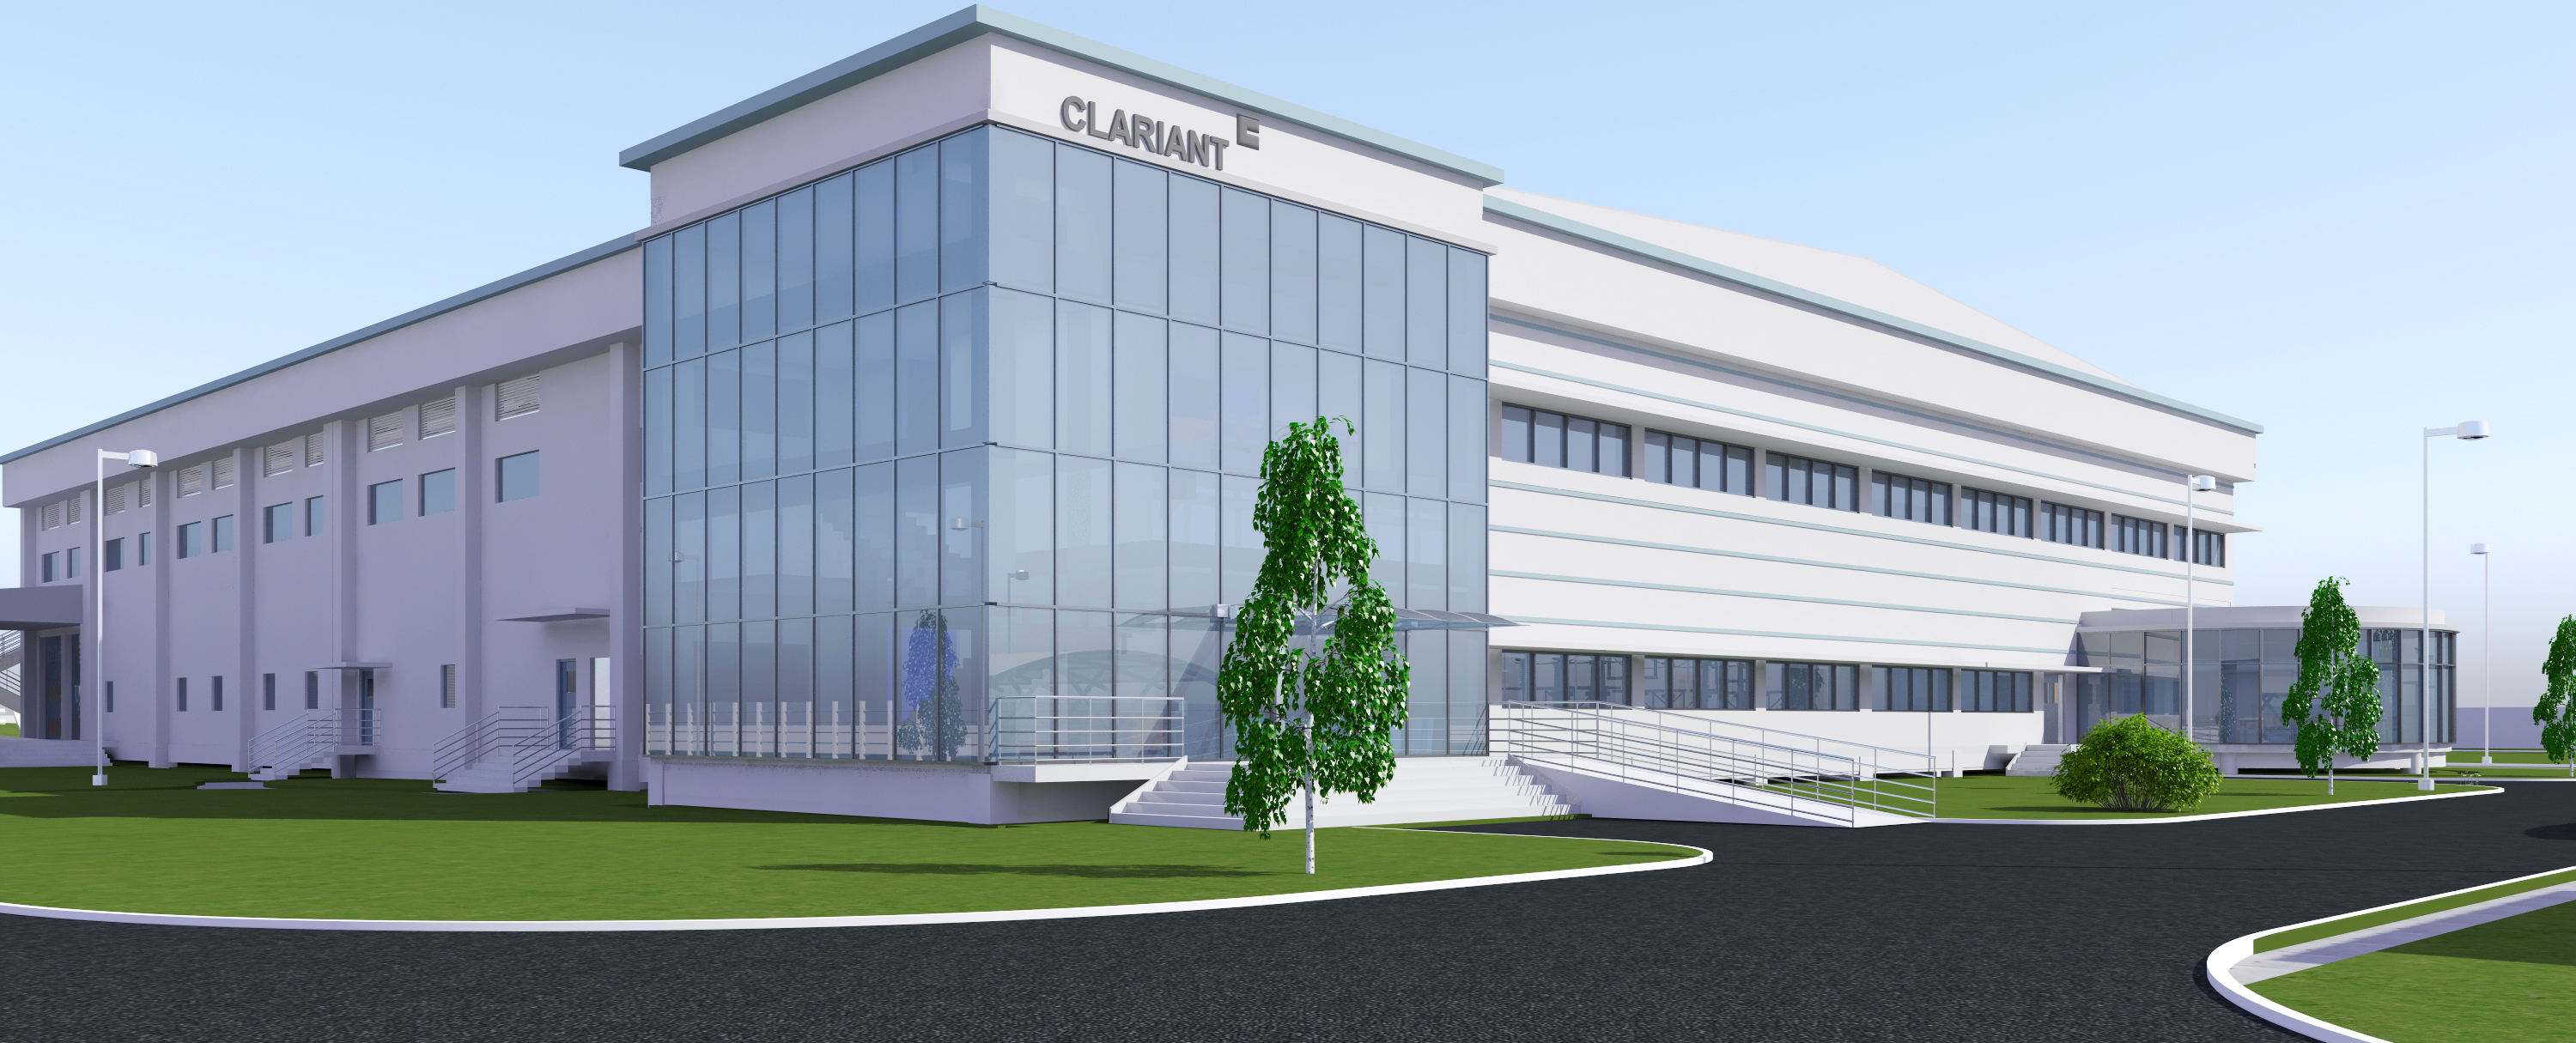 Clariant Healthcare Packaging facility in India plans production operations in 2017. (Photo: Clari...